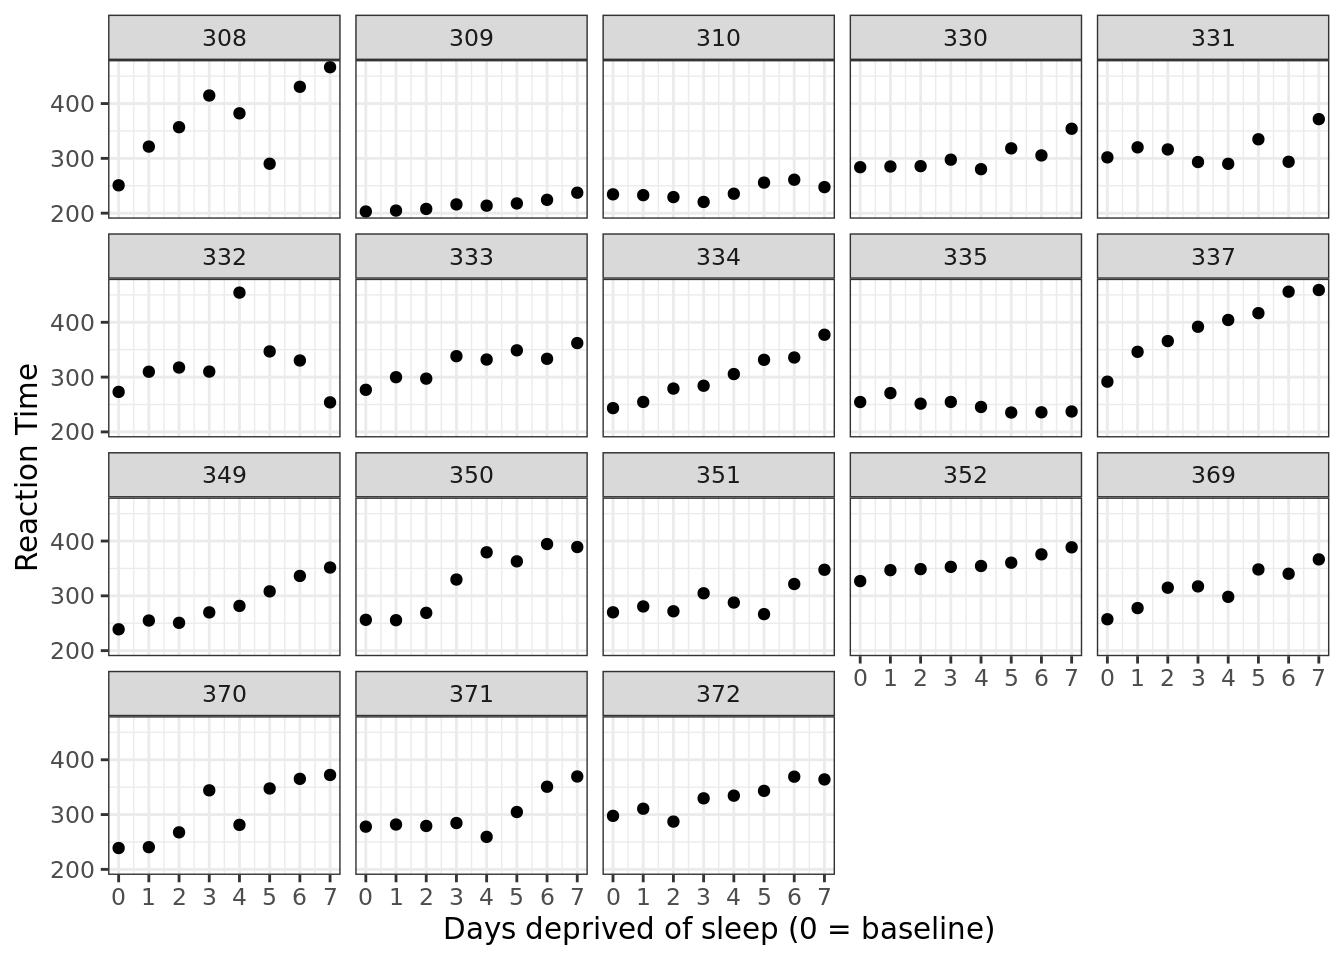 *Data from Belenky et al. (2003), showing reaction time at baseline (0) and after each day of sleep deprivation.*